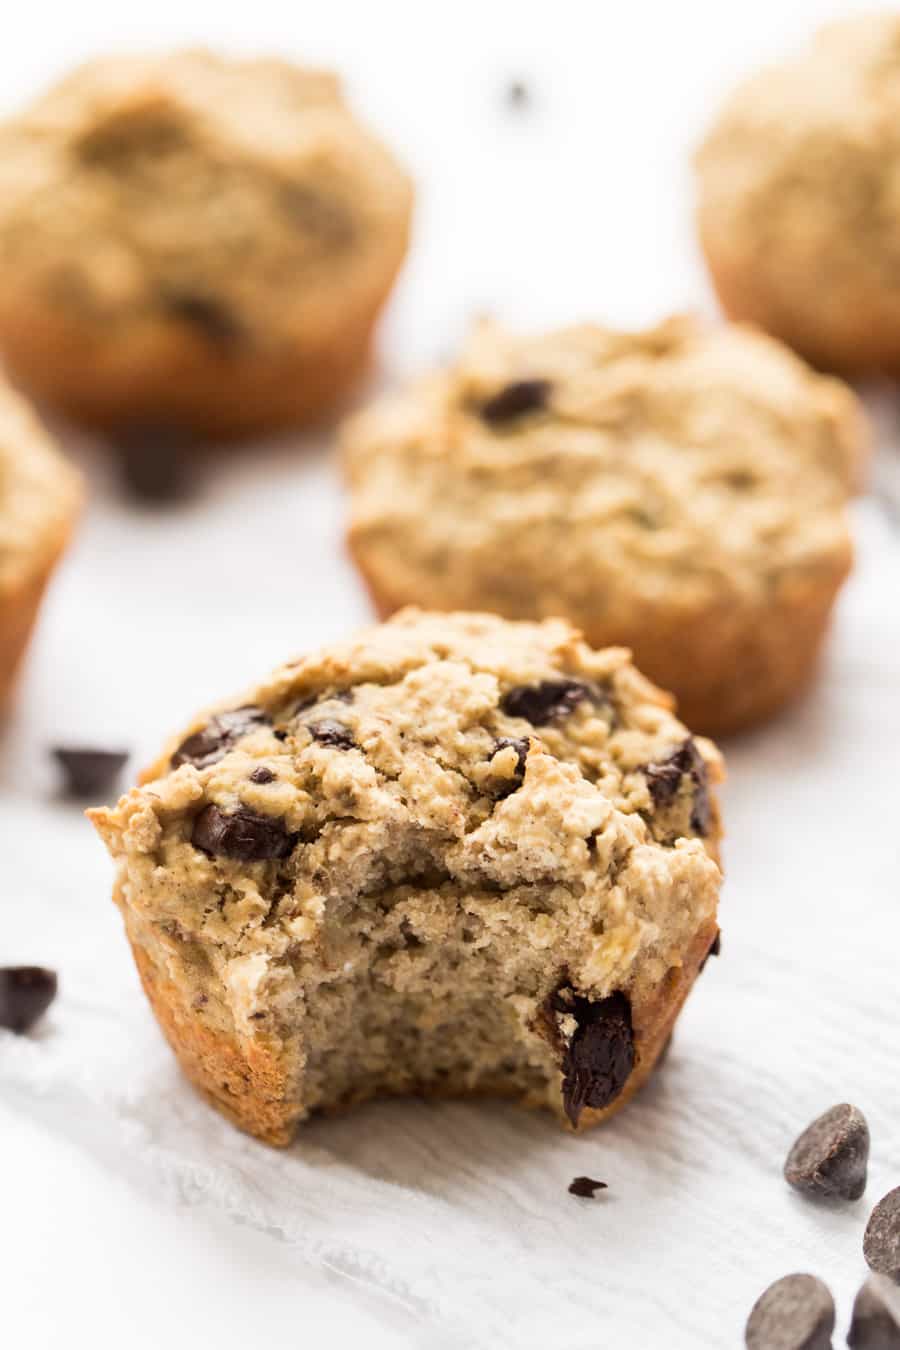 These SKINNY Banana Chocolate Chip Quinoa Muffins are made with wholesome ingredients, sweetened naturally and taste AMAZING!